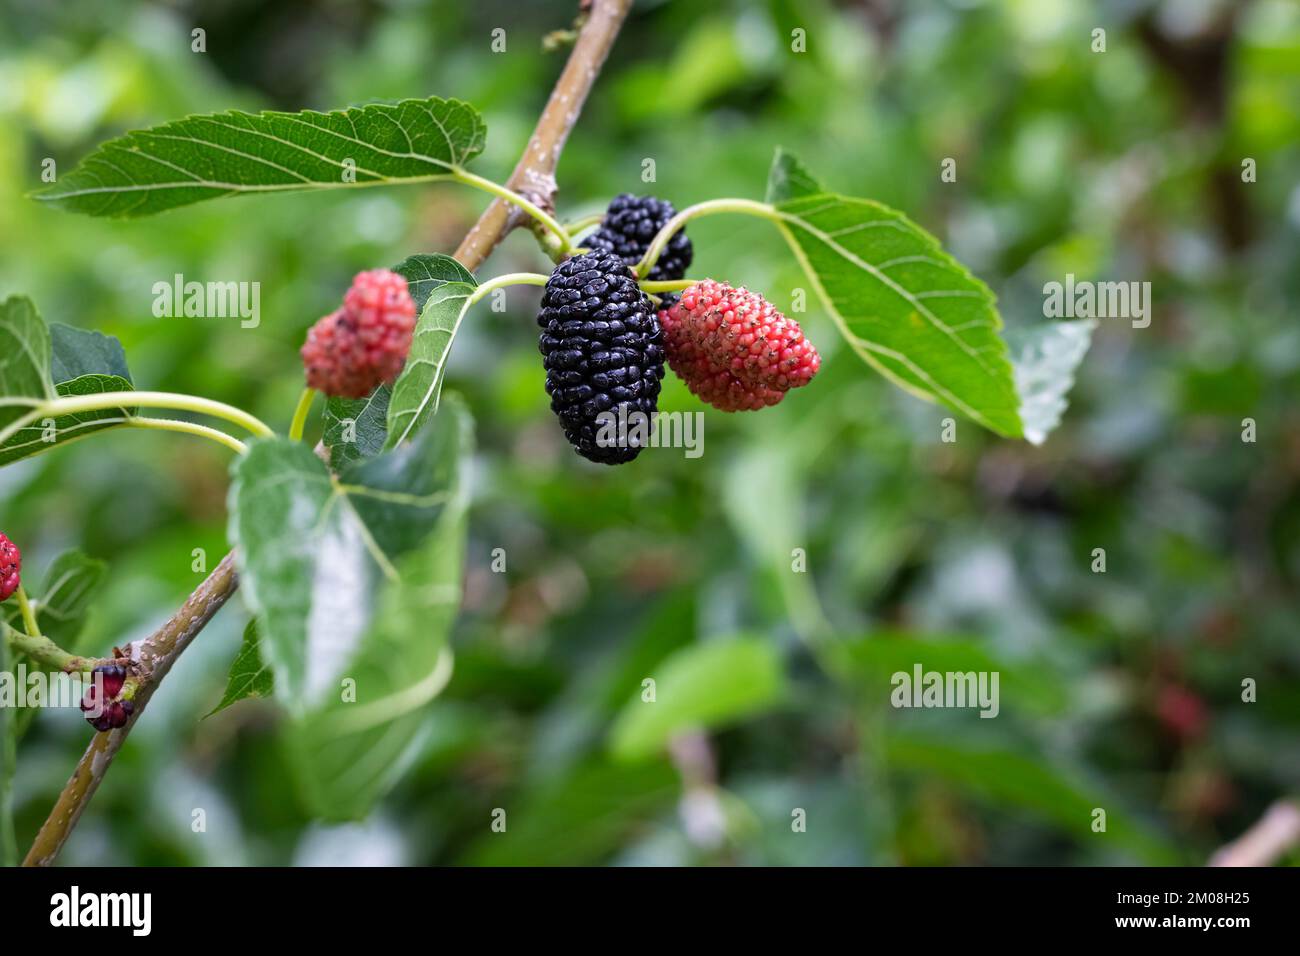 Ripe and green mulberry berries growing on branch with green leaves. Agricultural plant with fruits in garden outdoors. blackberry in forest. Raw Stock Photo